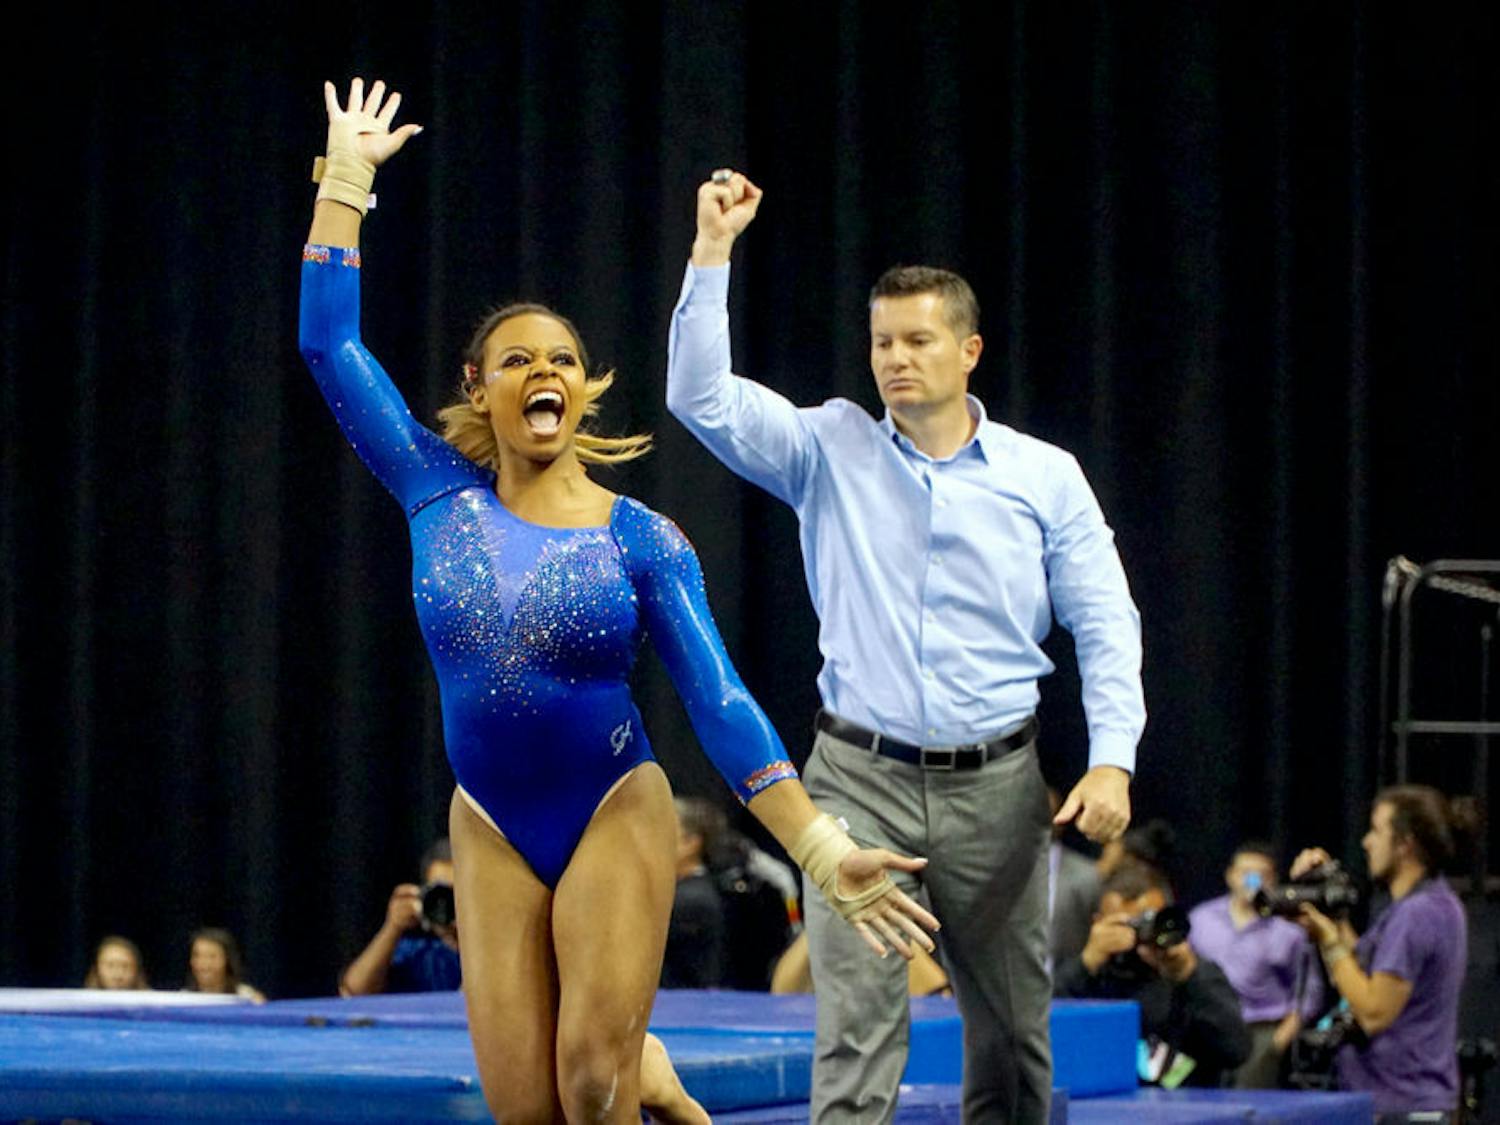 Kennedy Baker (left) and assistant coach Adrian Burde (right) celebrate after Baker's vault routine&nbsp;during the NCAA Gymnastics Super Six on April 16, 2016, in Fort Worth, Texas.